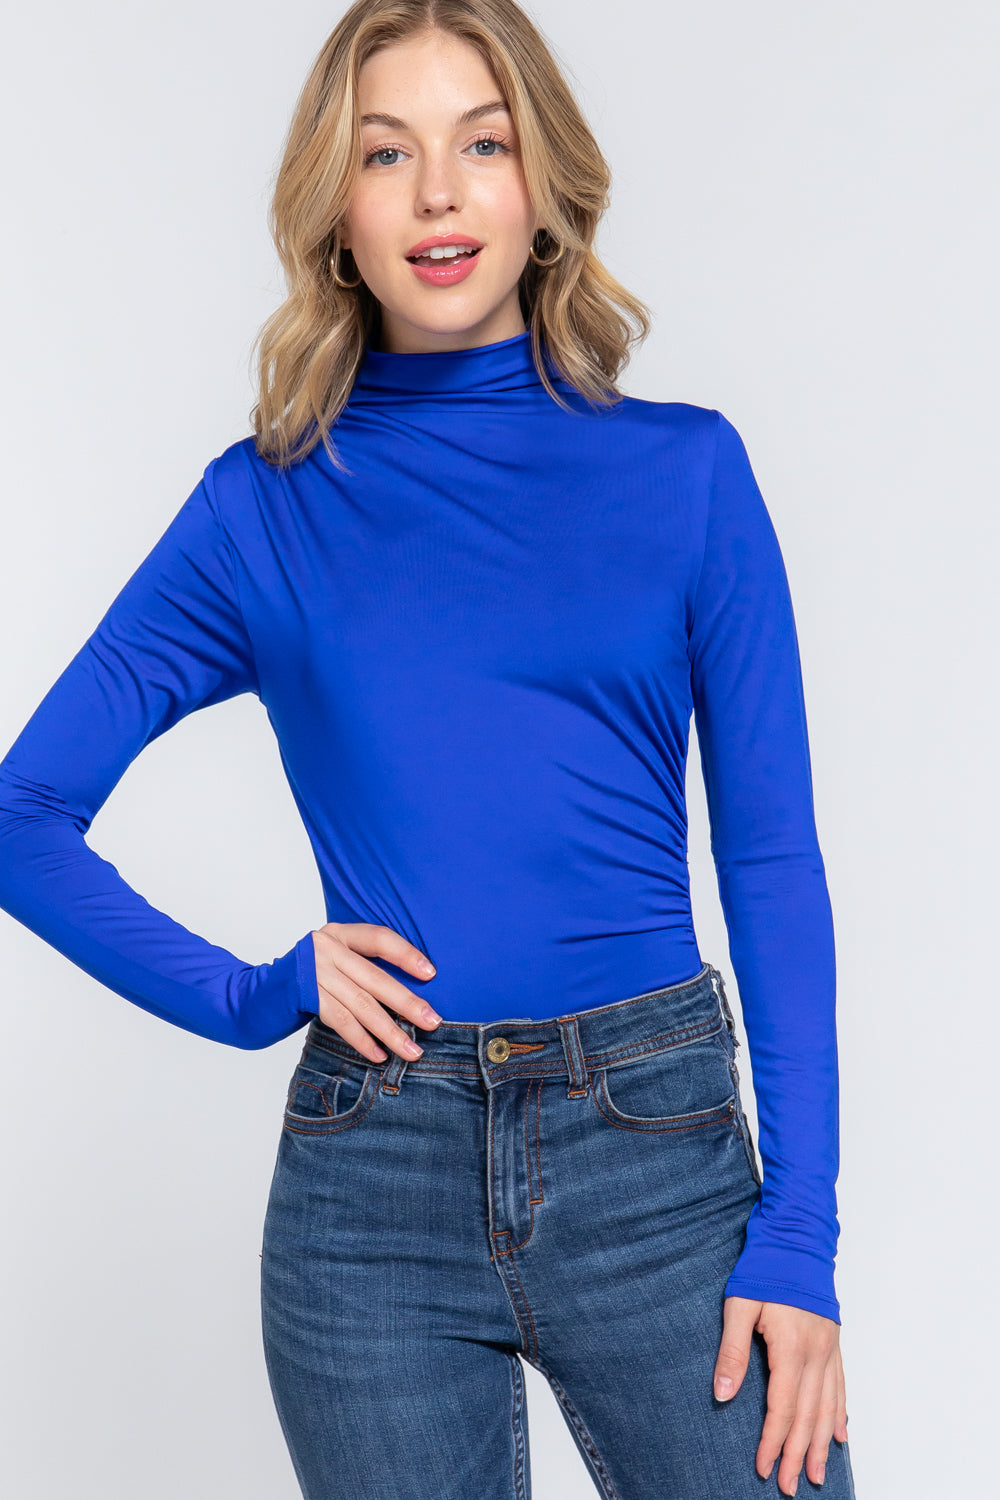 Royal - Long Sleeve High Neck Shirring Detail Ity Knit Bodysuit - 3 colors - womens bodysuit at TFC&H Co.